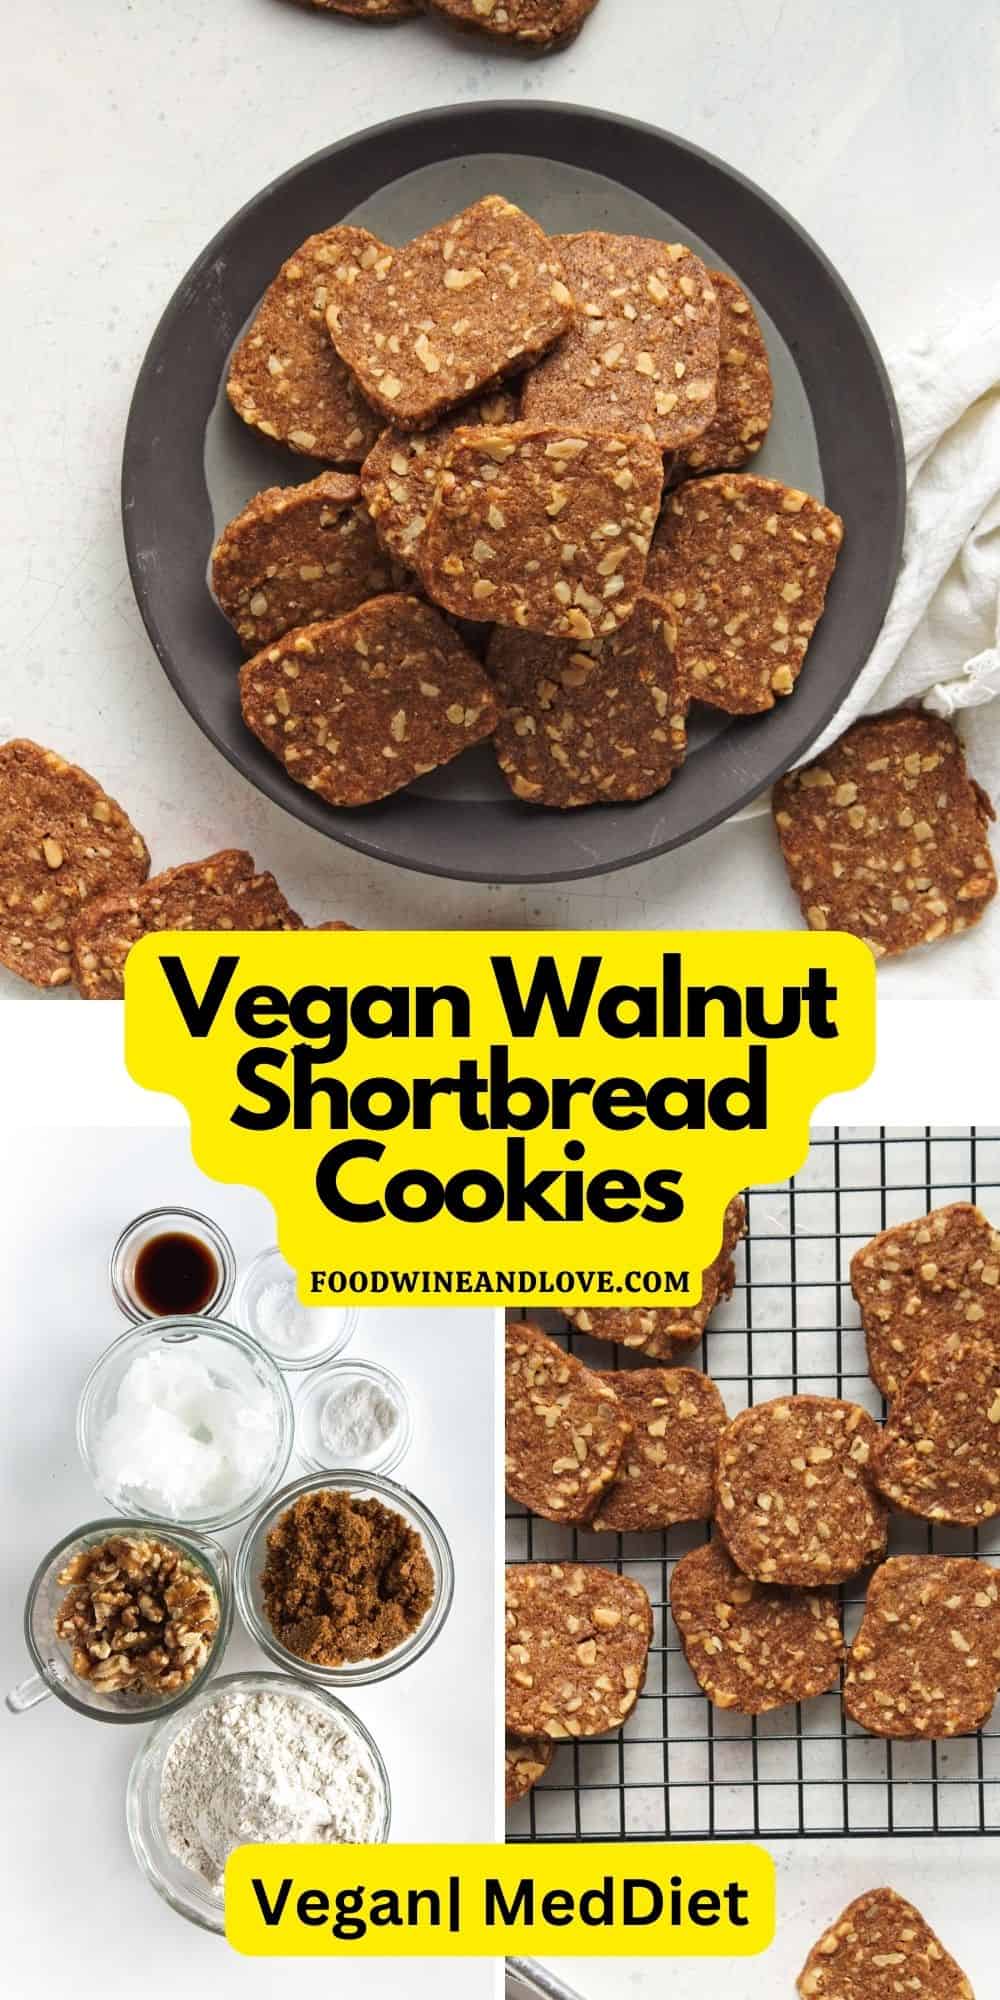 Vegan Walnut Shortbread Cookies, a simple and flavorful dessert or snack recipe based on a classic treat.  Made with no added dairy.